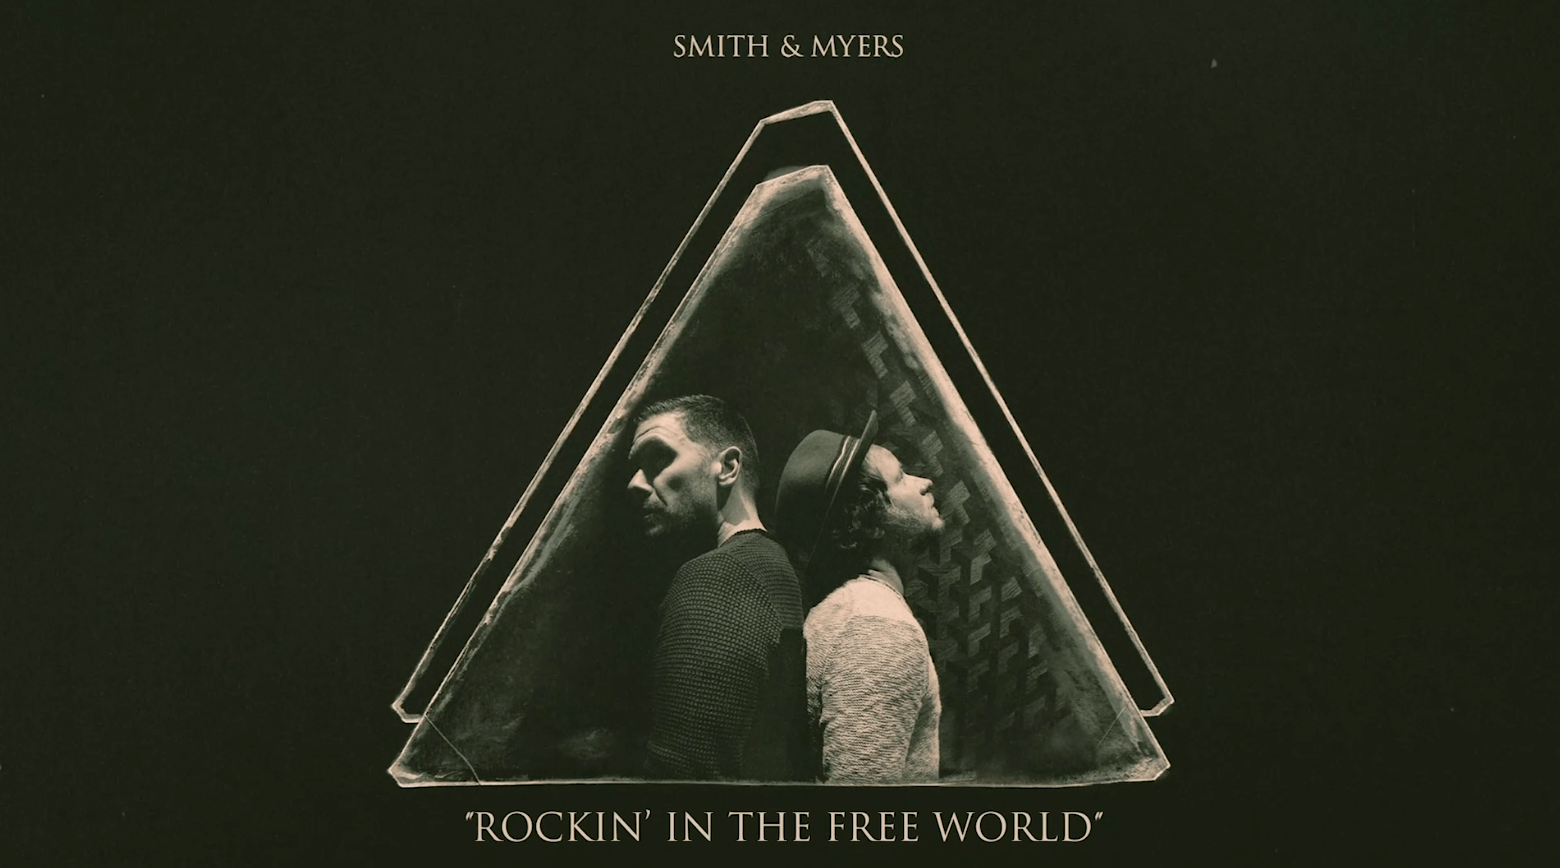 SMITH & MYERS - ROCKIN' IN THE FREE WORLD (NEIL YOUNG COVER) [OFFICIAL AUDIO]